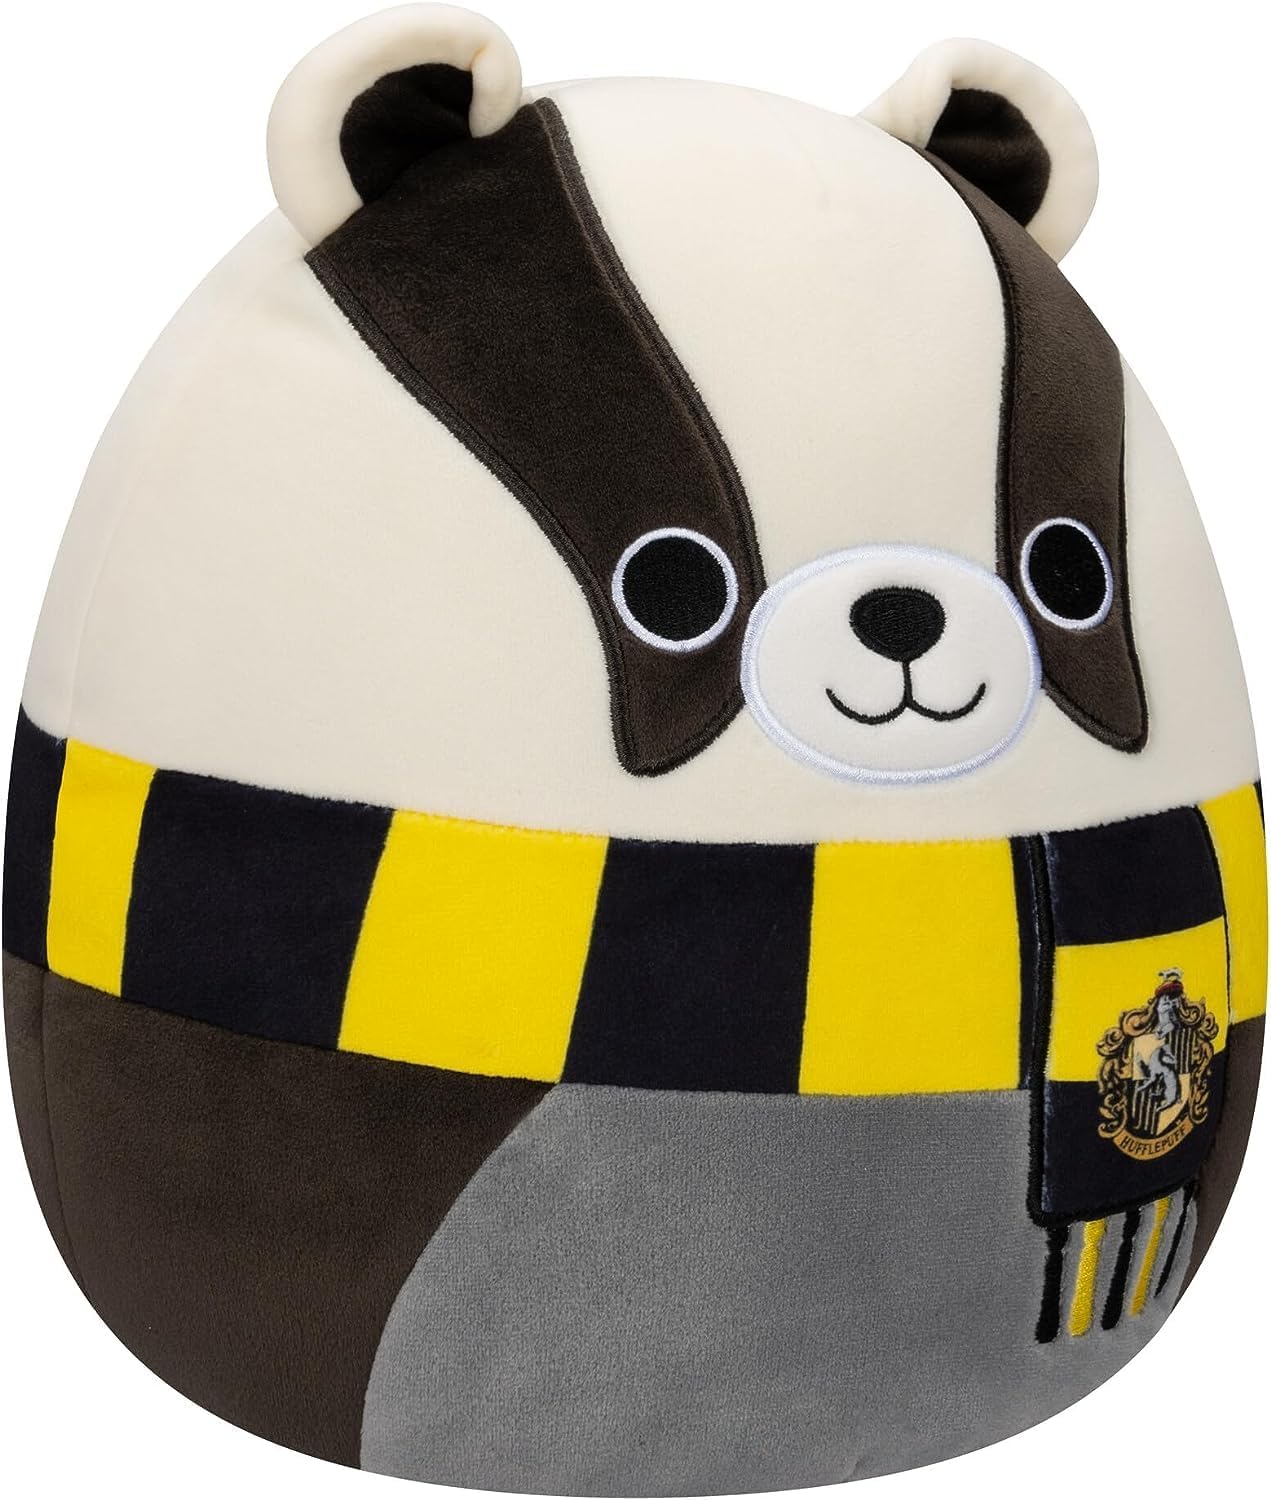 Hufflepuff the Badger 8” Squishmallow - Harry Potter House Animals